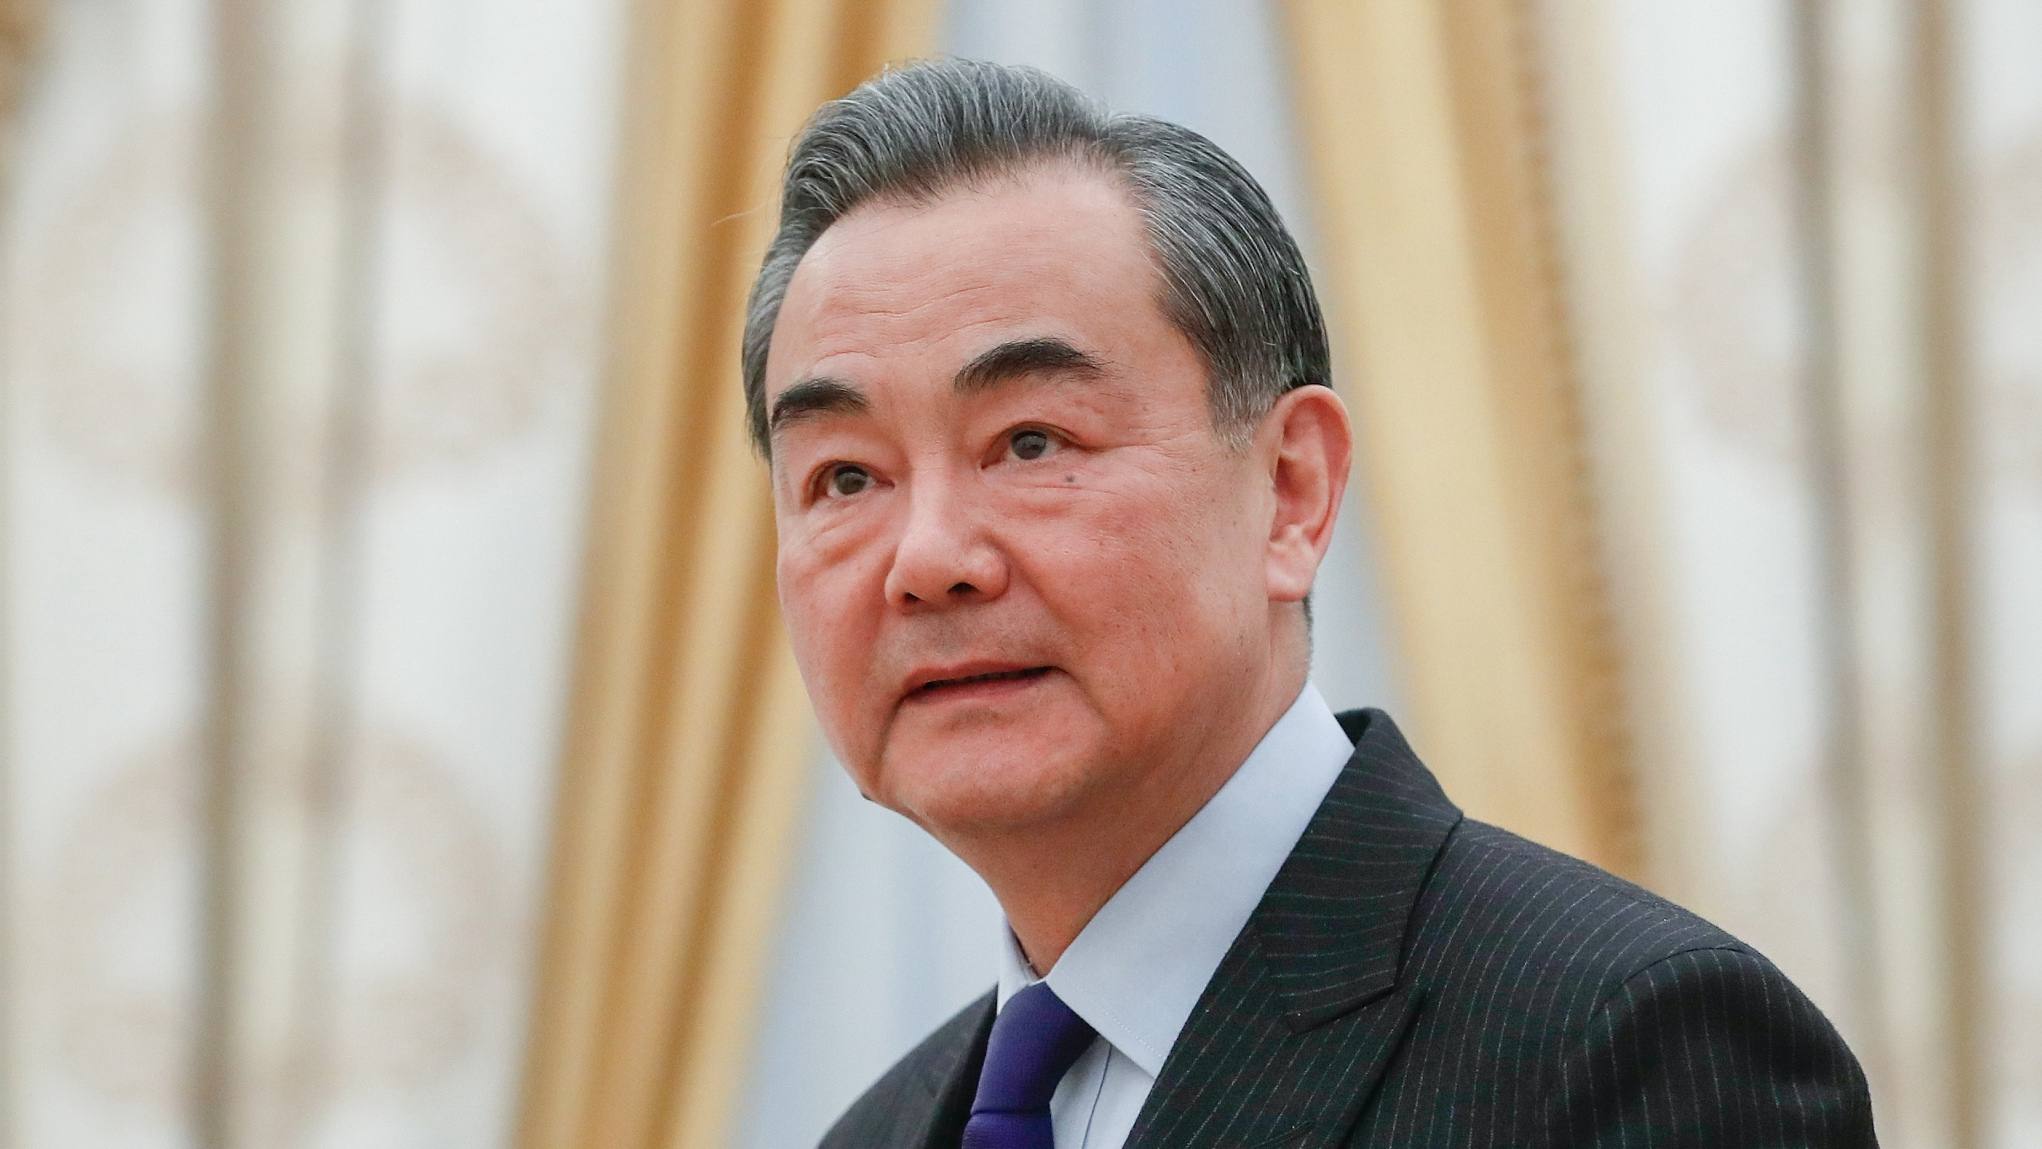 Wang Yi, a member of the Political Bureau of the Communist Party of China (CPC) Central Committee and director of the Office of the Foreign Affairs Commission of the CPC Central Committee /VCG